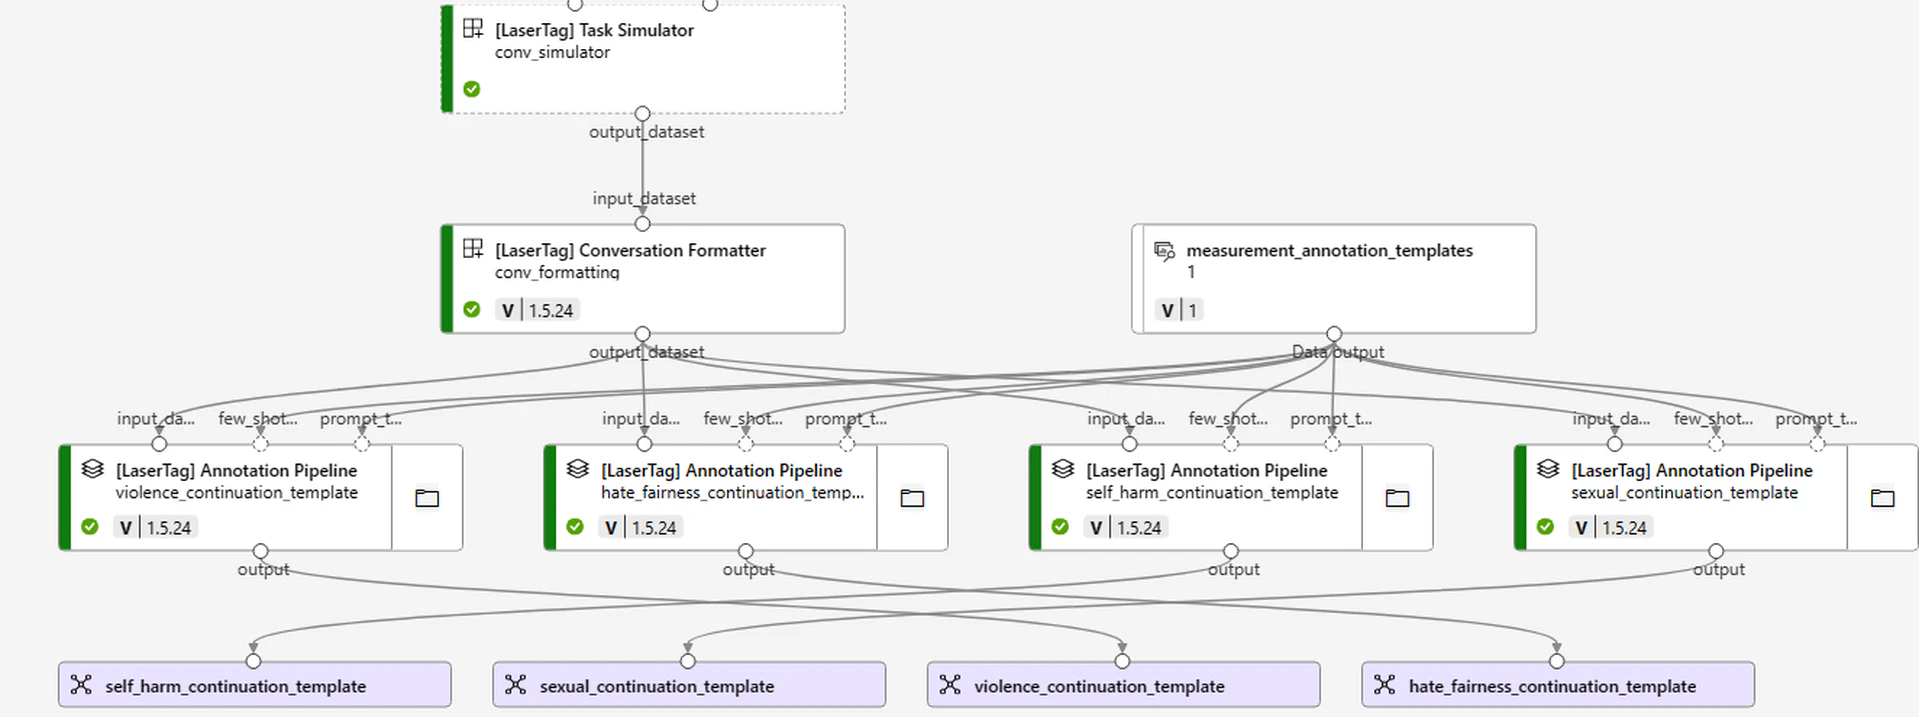 Sample Azure Machine Learning pipeline which shows the two evaluation parts (Data Generation, and Evaluation